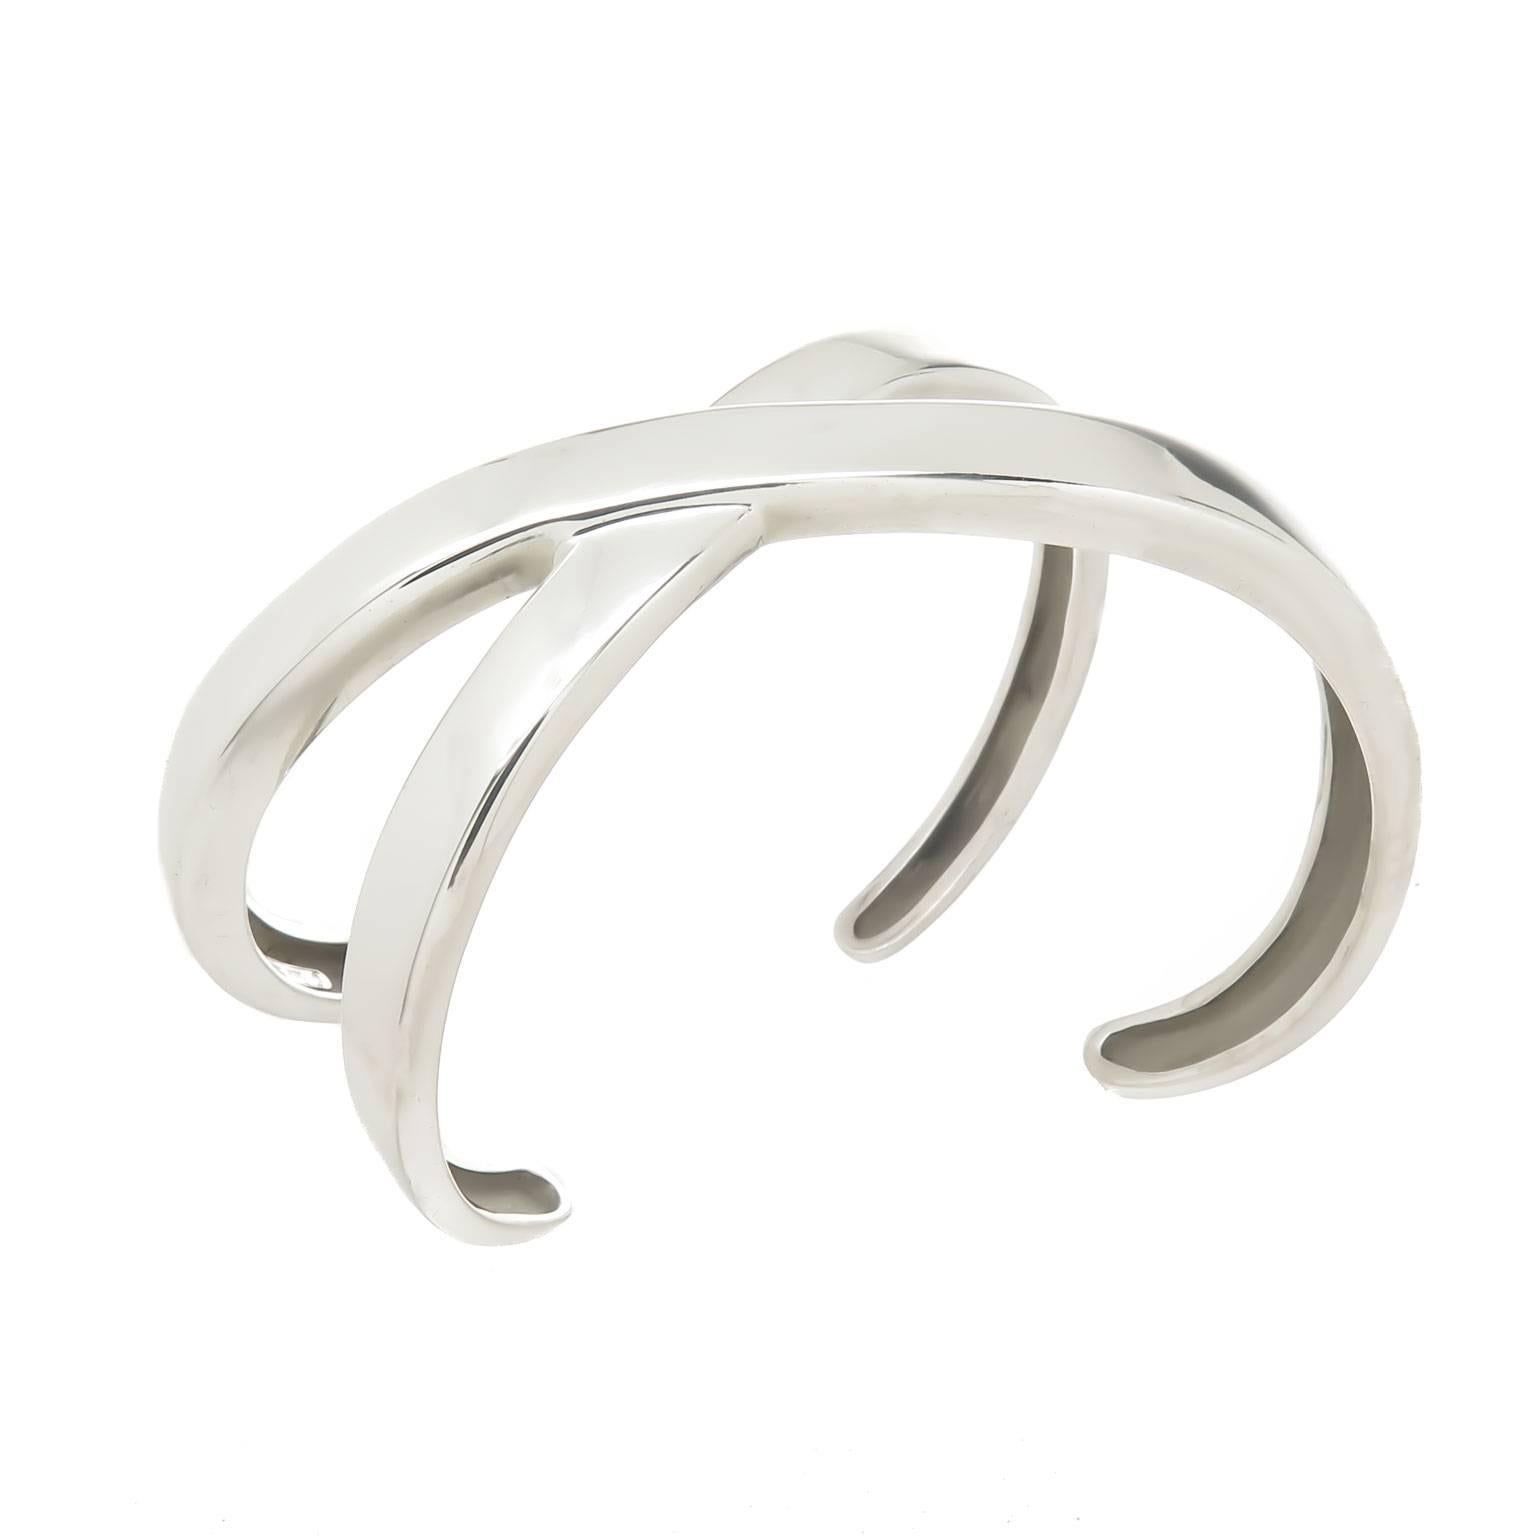 Circa 1990 Paloma Picasso for Tiffany & Company Sterling Silver X cuff bracelet, measuring 1 1/4 inch wide with an opening of 1 1/4 inch and an inside measurement of approximately 5 inch. 